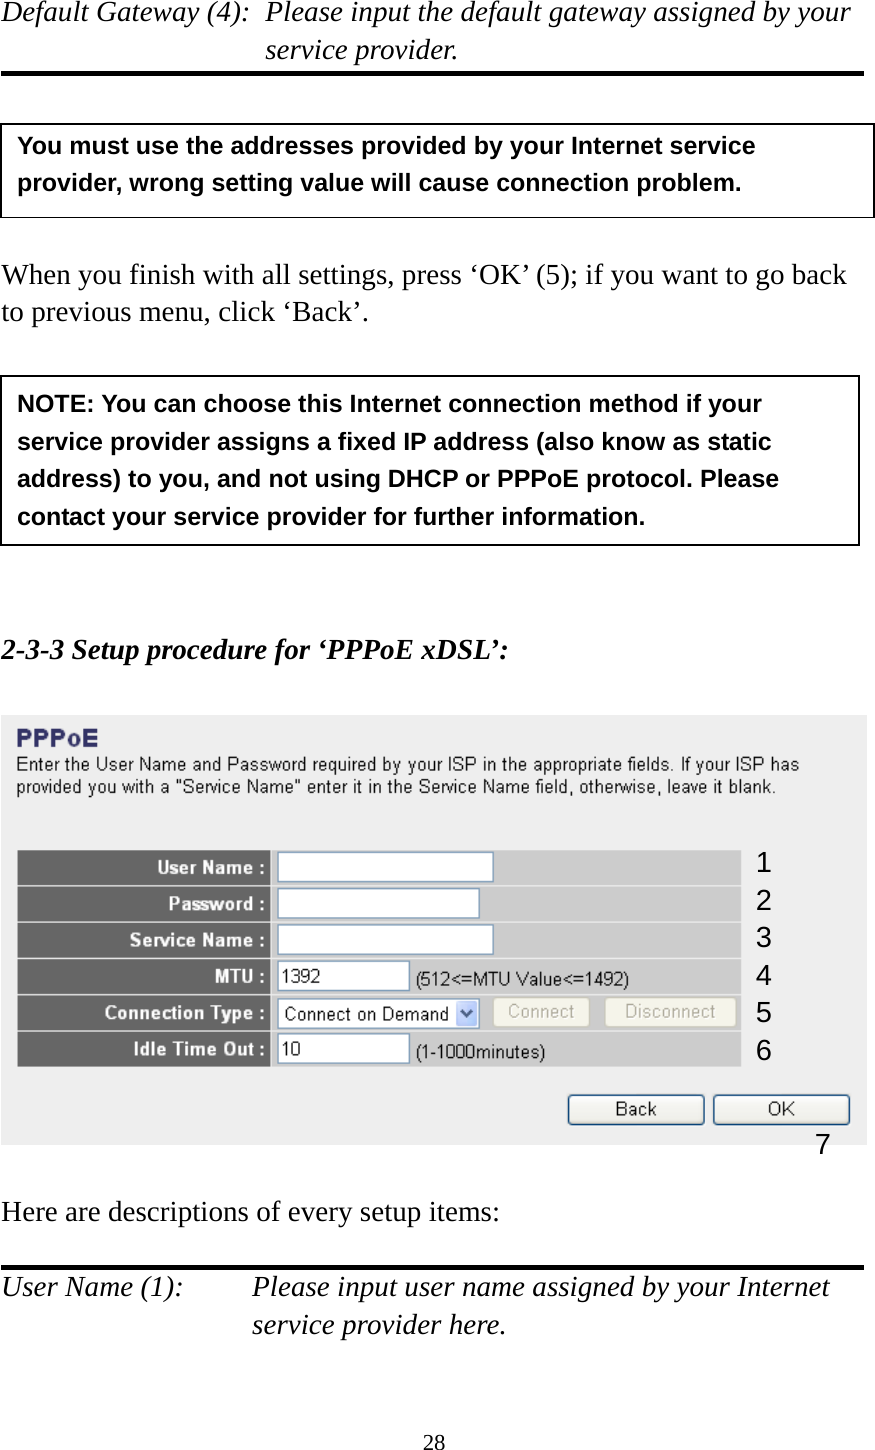 28  Default Gateway (4):  Please input the default gateway assigned by your service provider.      When you finish with all settings, press ‘OK’ (5); if you want to go back to previous menu, click ‘Back’.         2-3-3 Setup procedure for ‘PPPoE xDSL’:    Here are descriptions of every setup items:  User Name (1):    Please input user name assigned by your Internet service provider here.  NOTE: You can choose this Internet connection method if your service provider assigns a fixed IP address (also know as static address) to you, and not using DHCP or PPPoE protocol. Please contact your service provider for further information. You must use the addresses provided by your Internet service provider, wrong setting value will cause connection problem.   1 2 4 3 5 6 7 